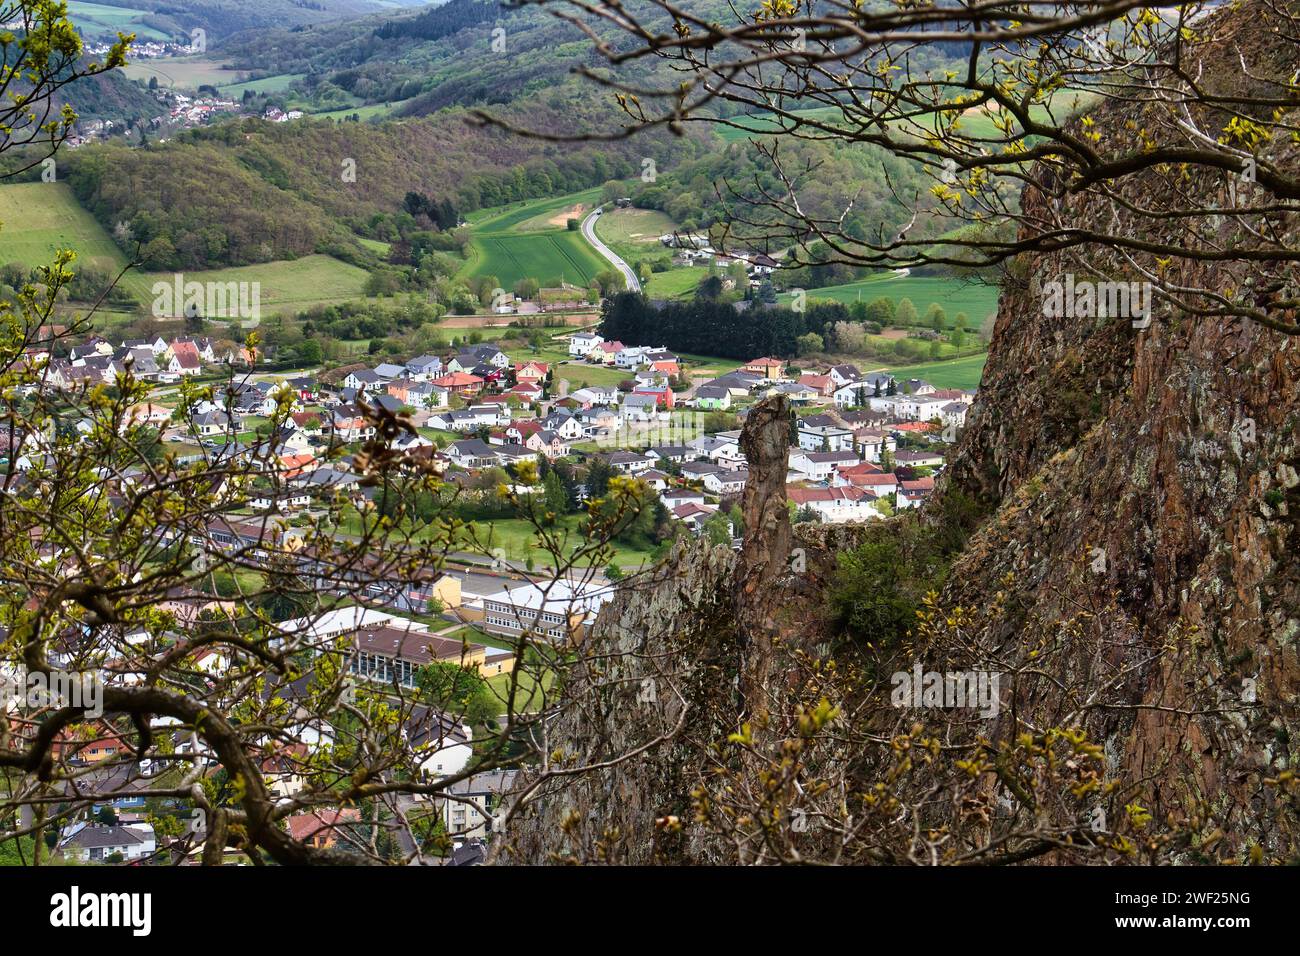 Bad Munster, Germany - May 9, 2021: Trees on the top of Rotenfels overlooking German town in Rhineland Palatinate, Germany. Stock Photo